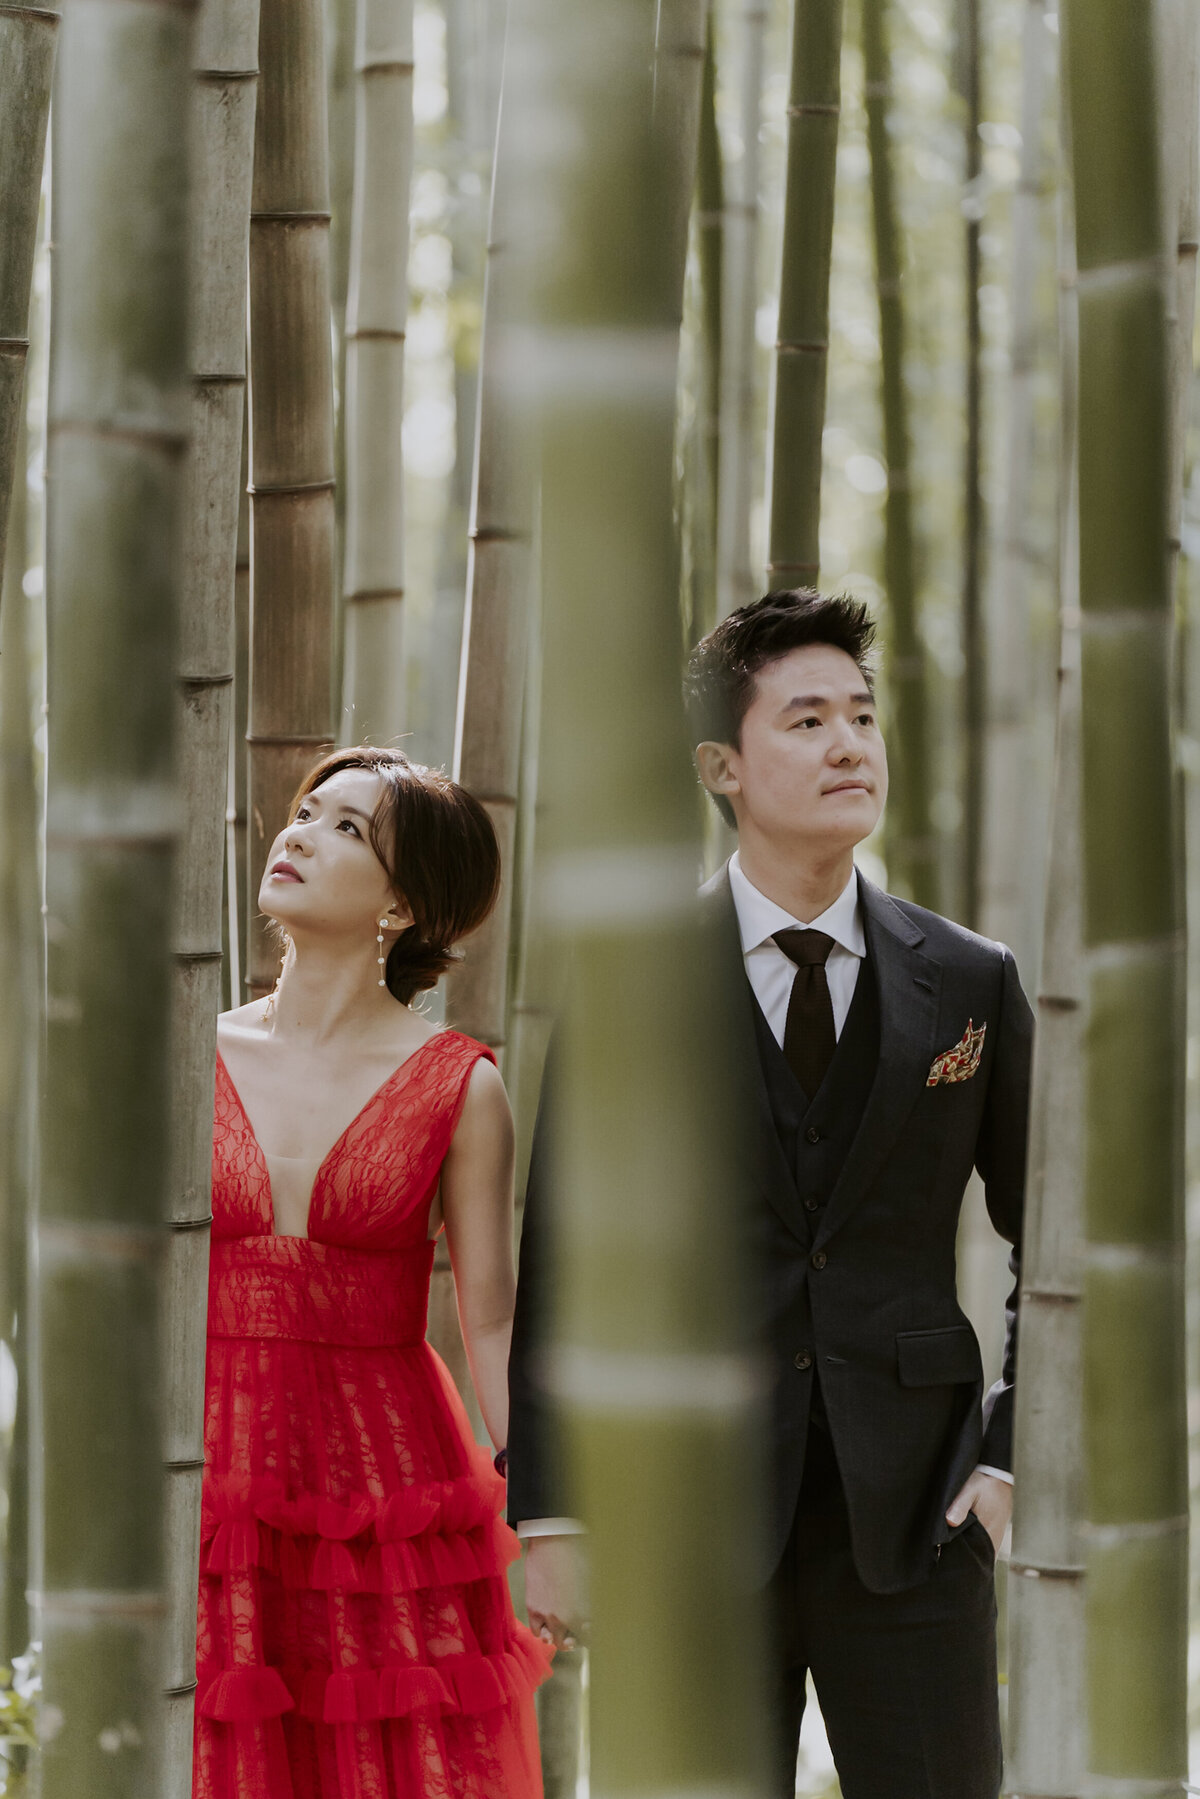 a woman wearing a red wedding dress and a man wearing a black suit look between the bamboo